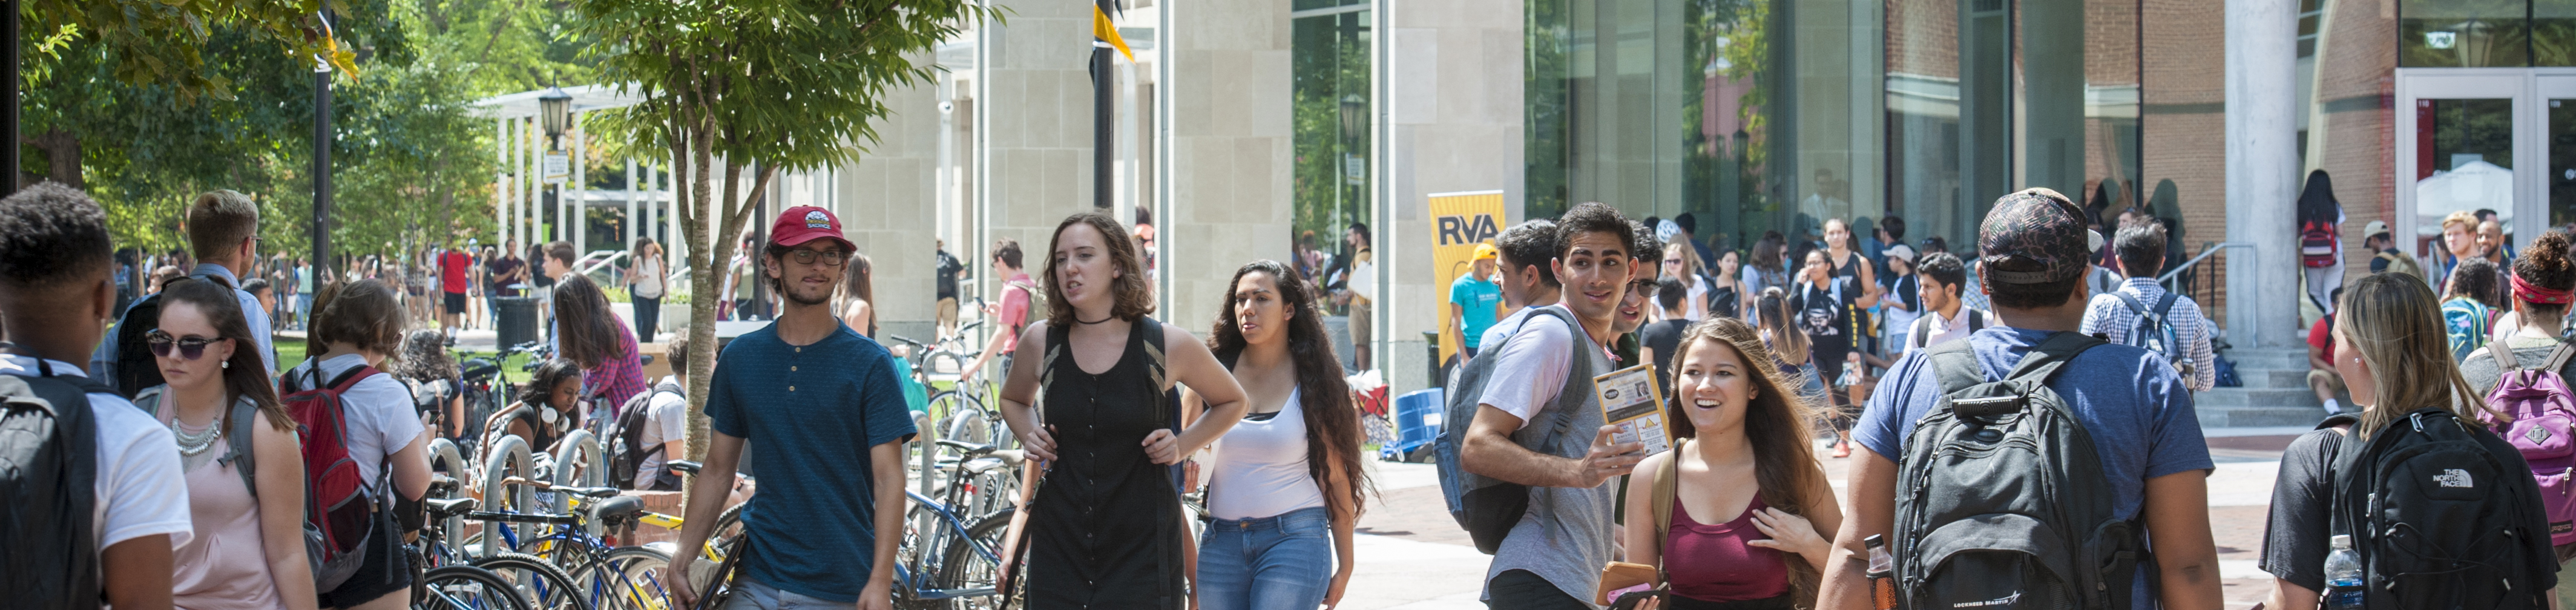 Students Walking near Cabell LIbrary